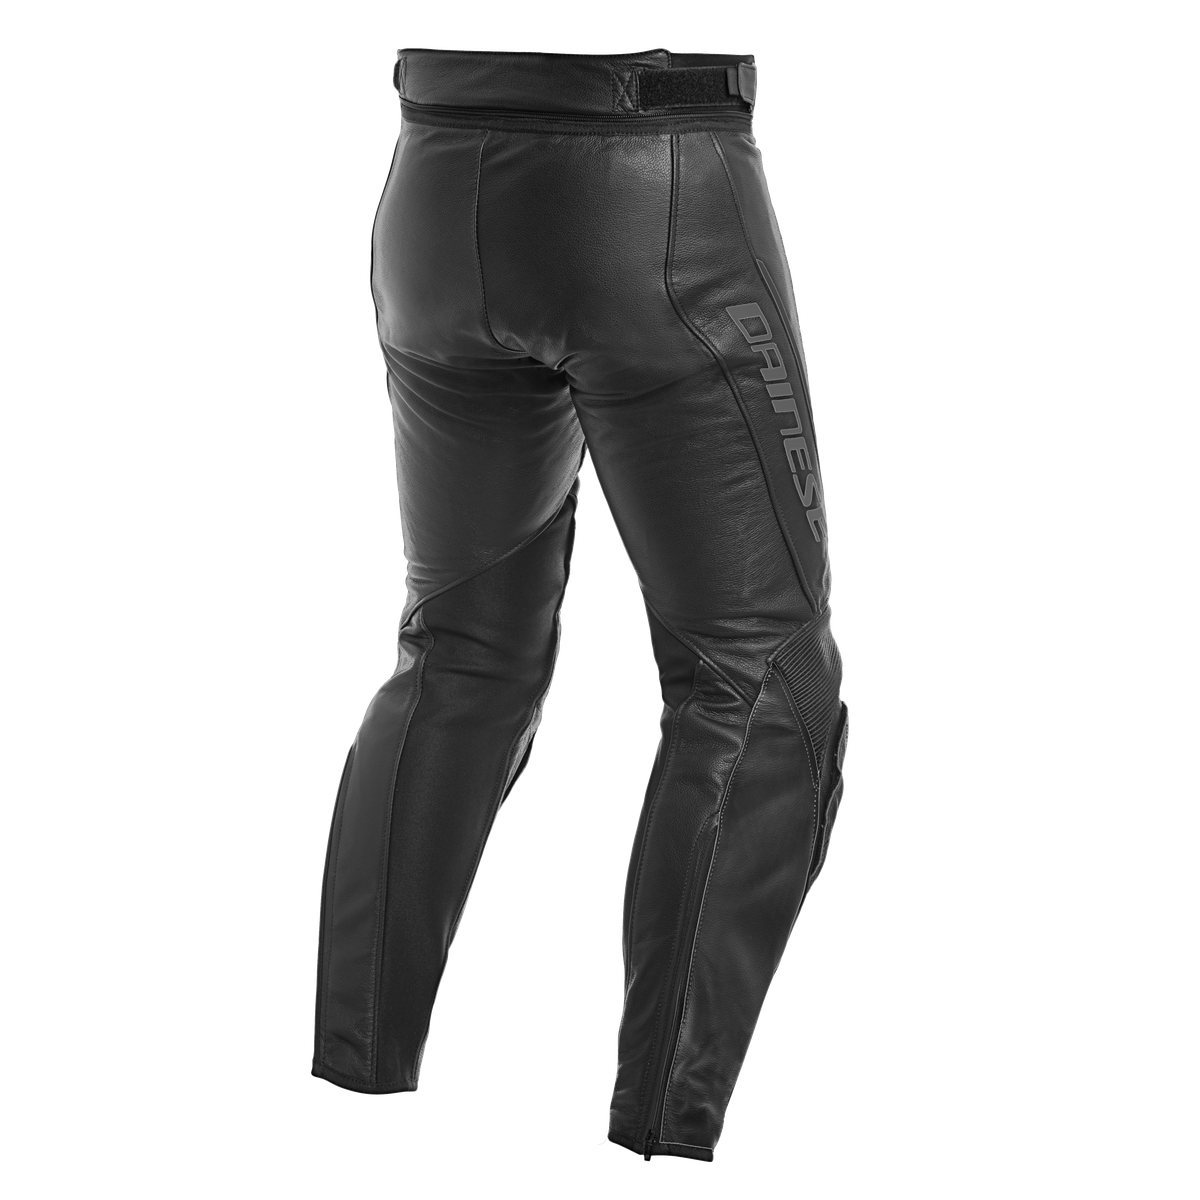 Assen Leather Pants, motorcycle pants in leather | Dainese